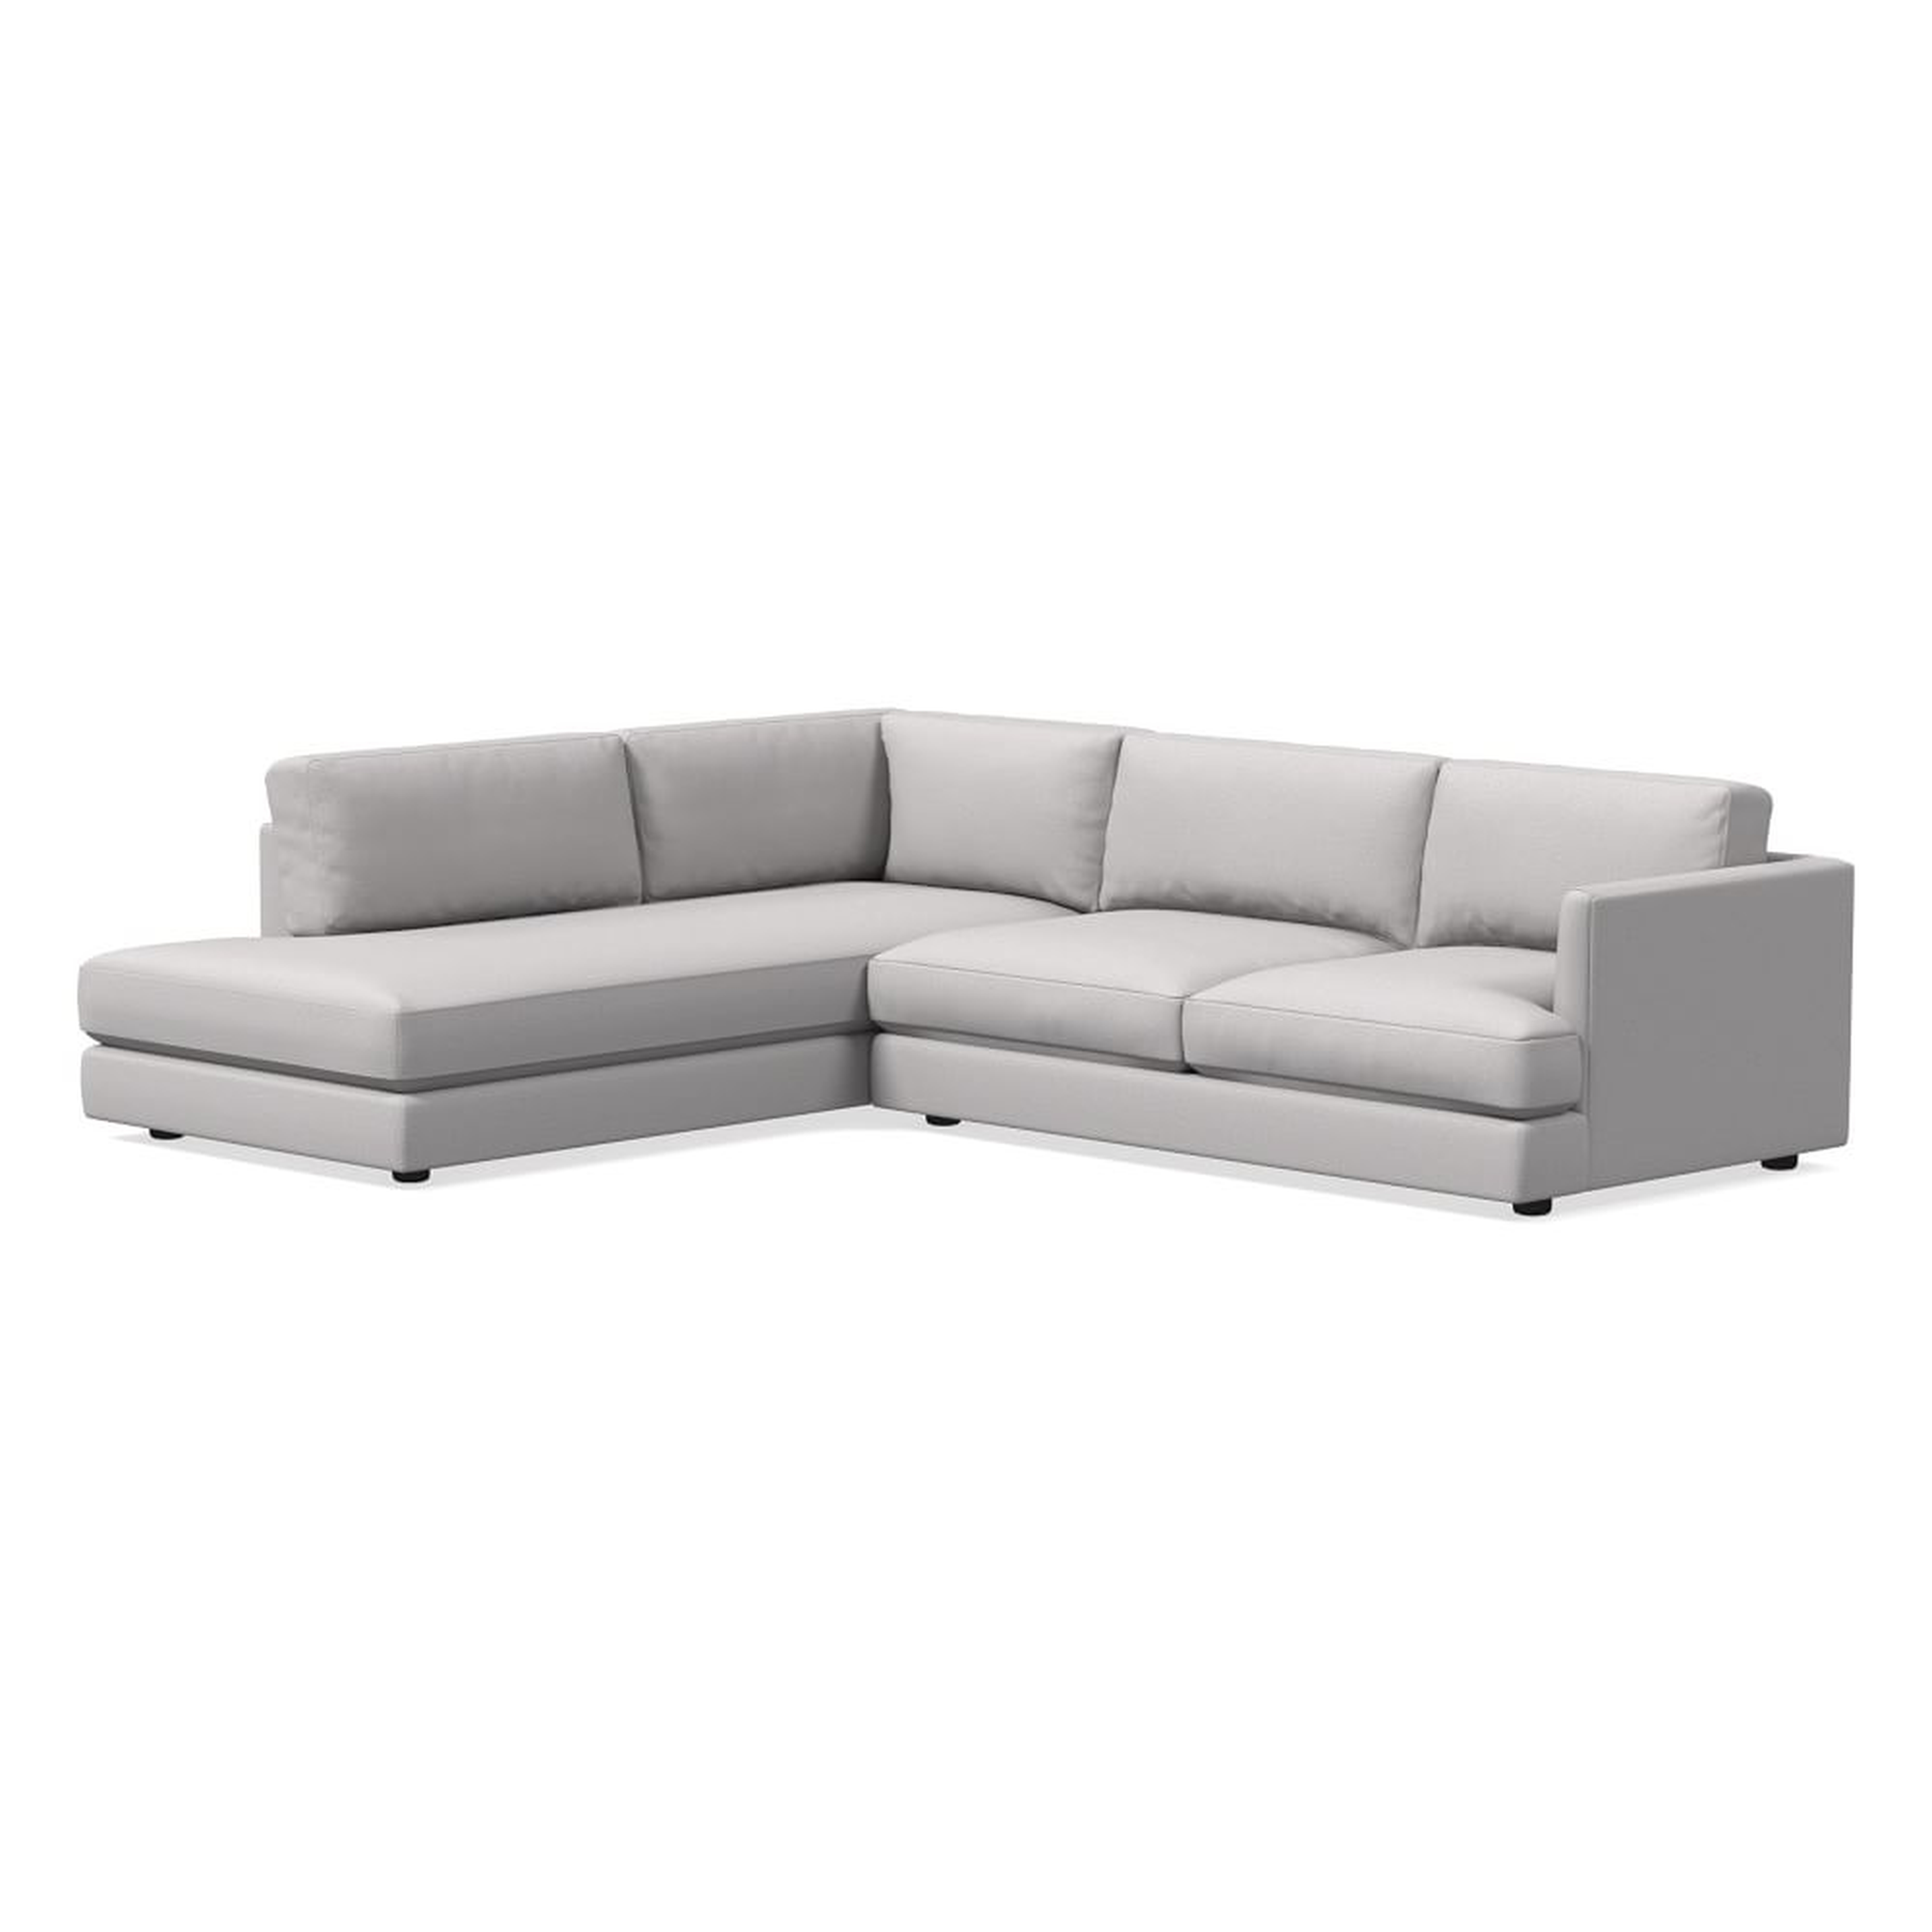 Haven 106" Left Multi Seat 2-Piece Bumper Chaise Sectional, Standard Depth, Performance Chenille Tweed, Frost Gray - West Elm